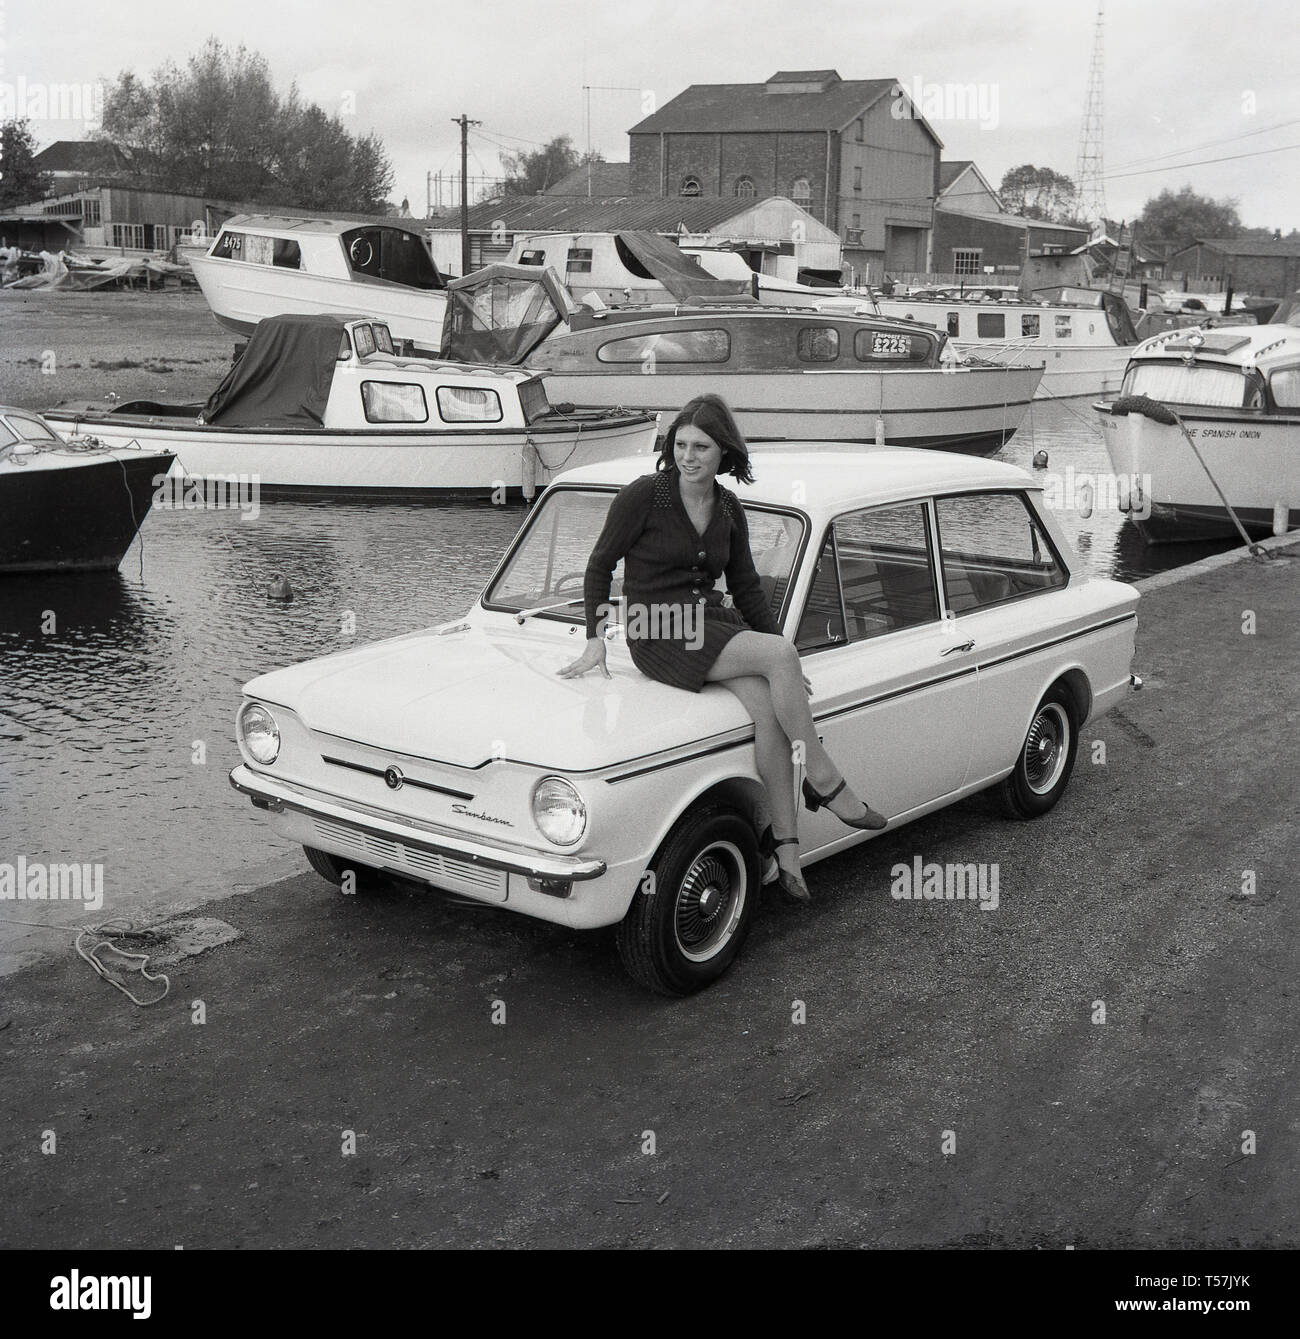 1967, historical, Outside at in a boatyard, a young  lady wearing a woollen cardigan and skirt sitting on the boot of a Sunbeam Sport motorcar,  the sports version of the famous small car, the Hillman Imp. The Hillman Imp was a small car made by Rootes Group and its successor Chrysler Europe from 1963 until 1976. It was the competitor in the small car category to the British Leyland Mini. Stock Photo